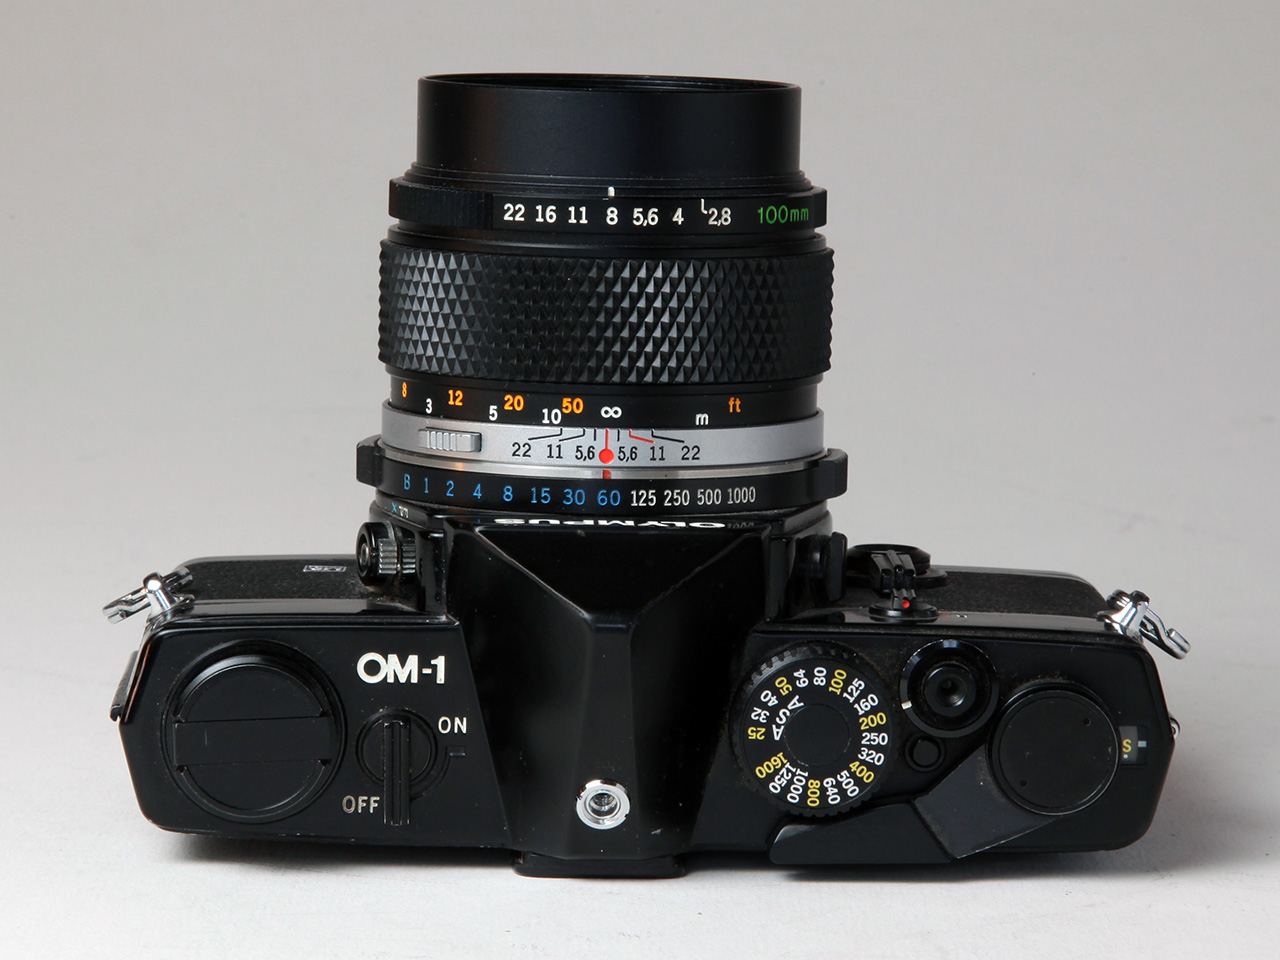 Click to Enlarge - Olympus OM System Zuiko Auto-T 1:2.8 f=100mm (MC) with OM-1 MD